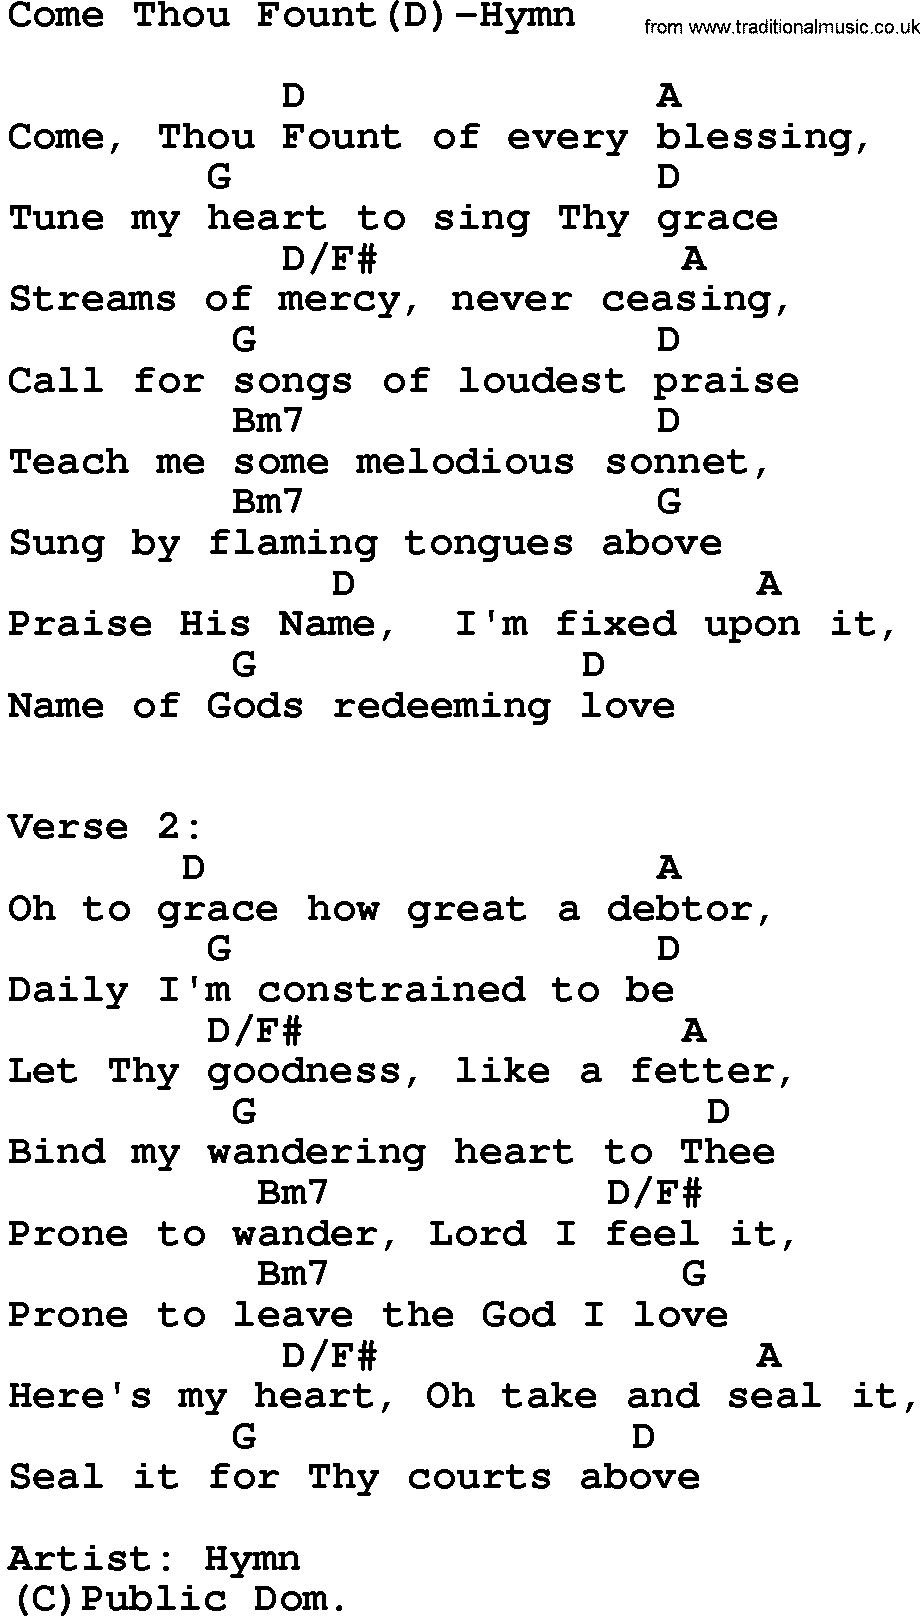 Come Thou Fount Chords Gospel Song Come Thou Fountd Hymn Lyrics And Chords